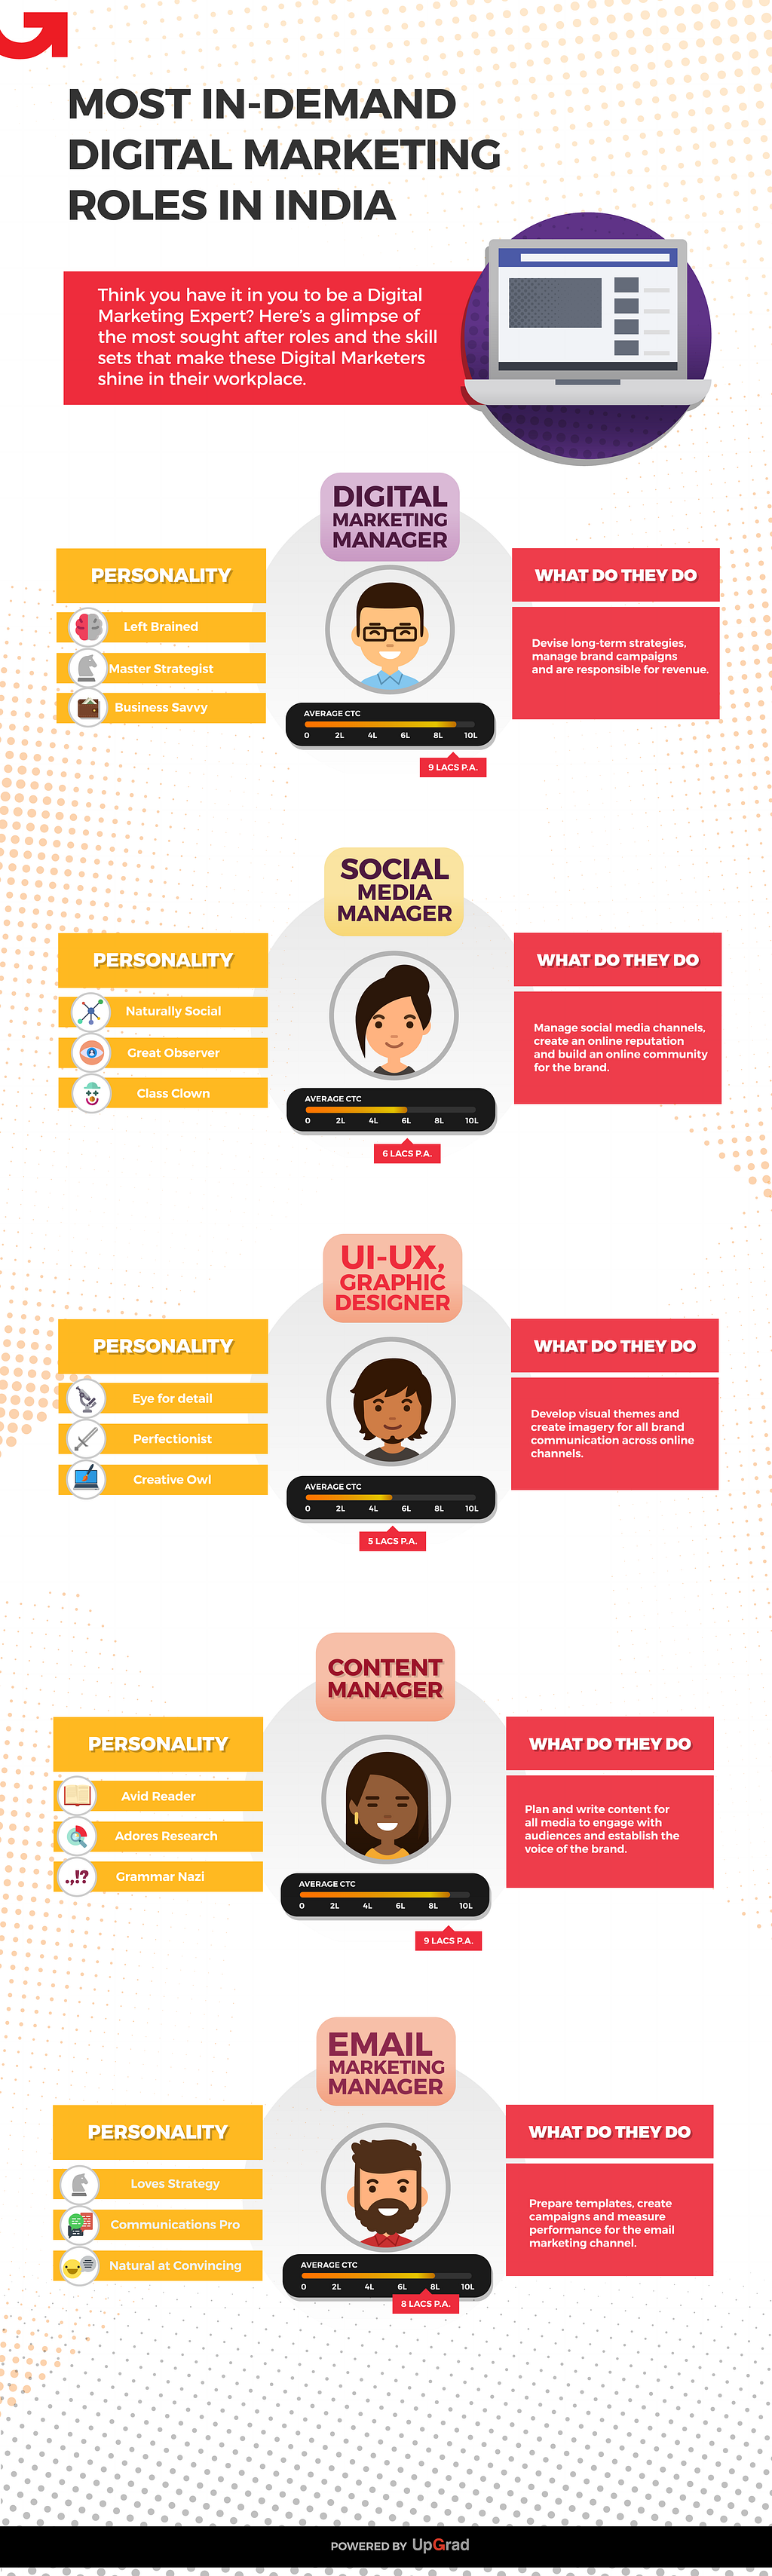 infographic-14-10-marketing-roles-05-2